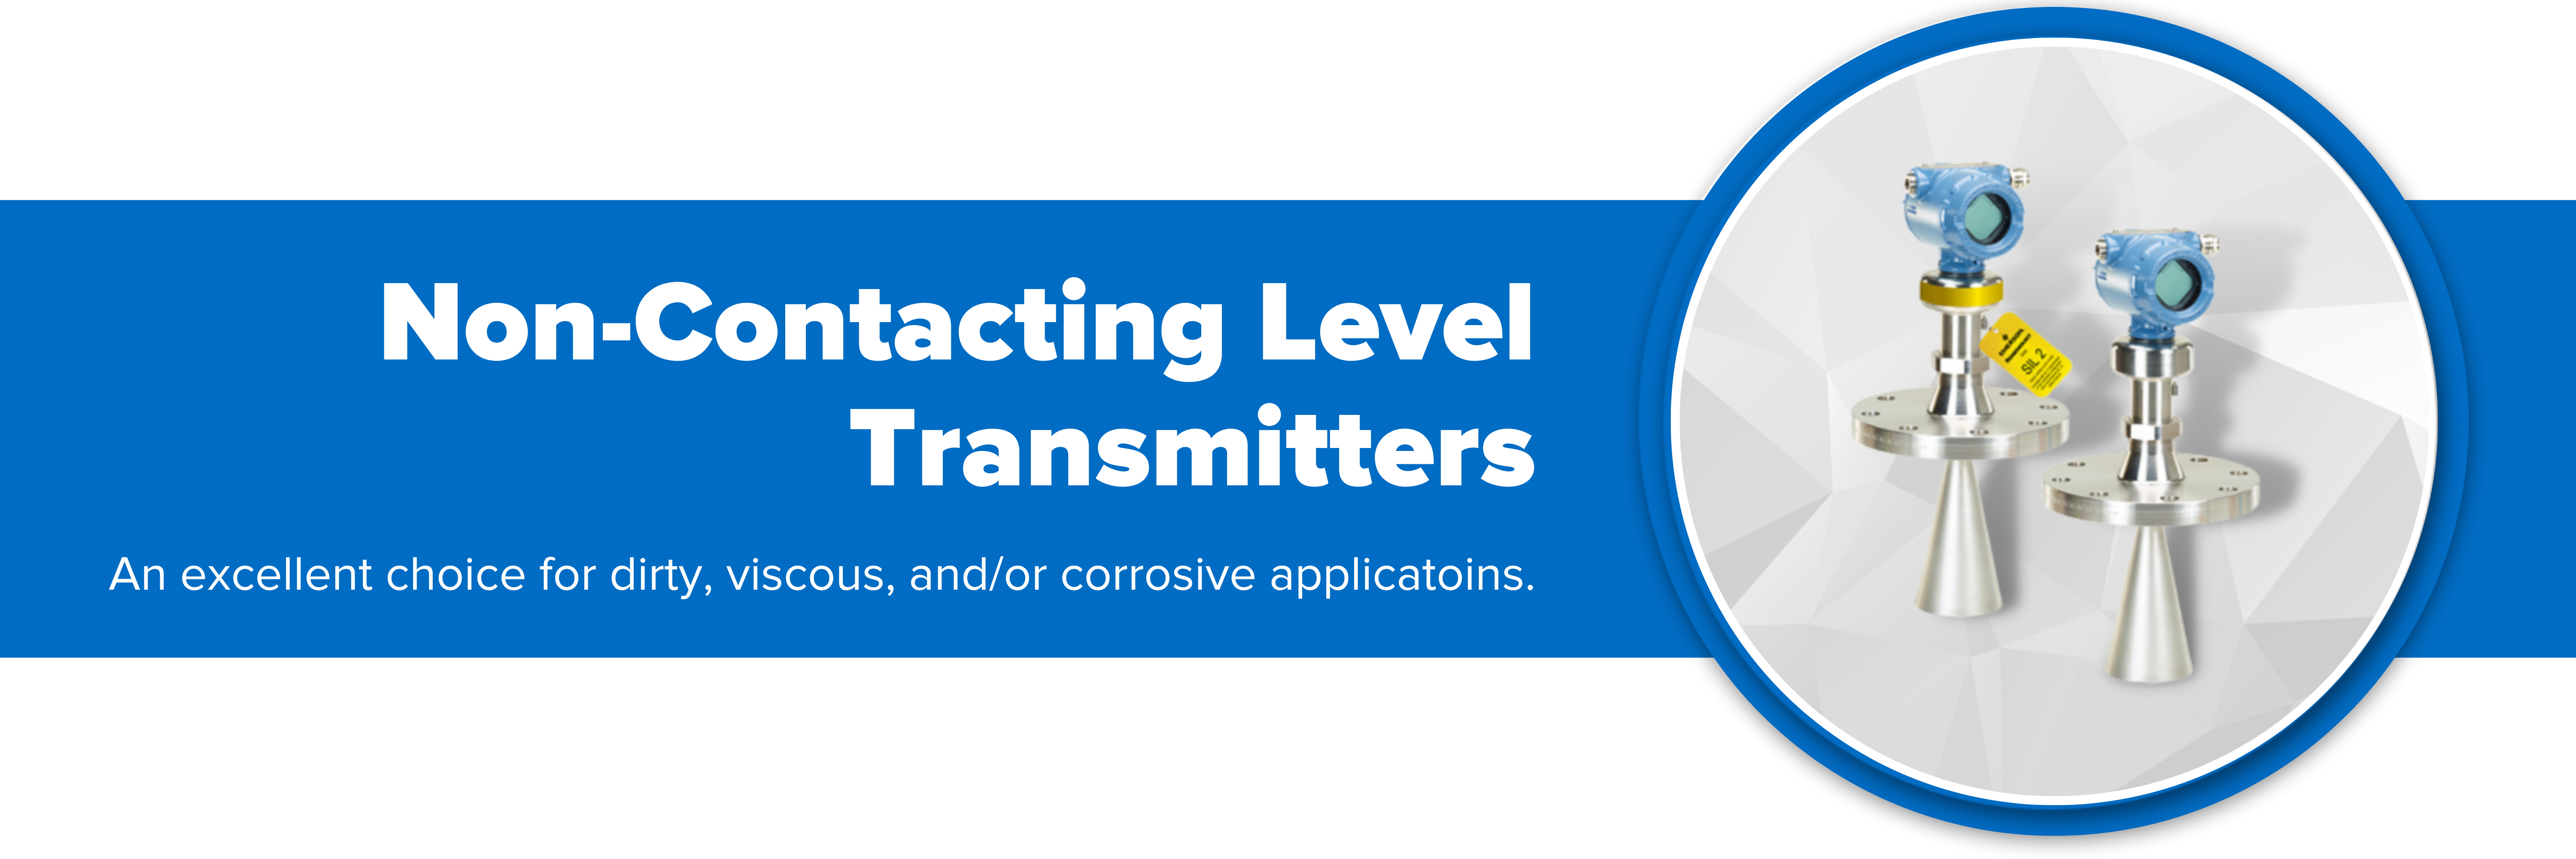 Header image with text "Non-Contacting Level Transmitters"